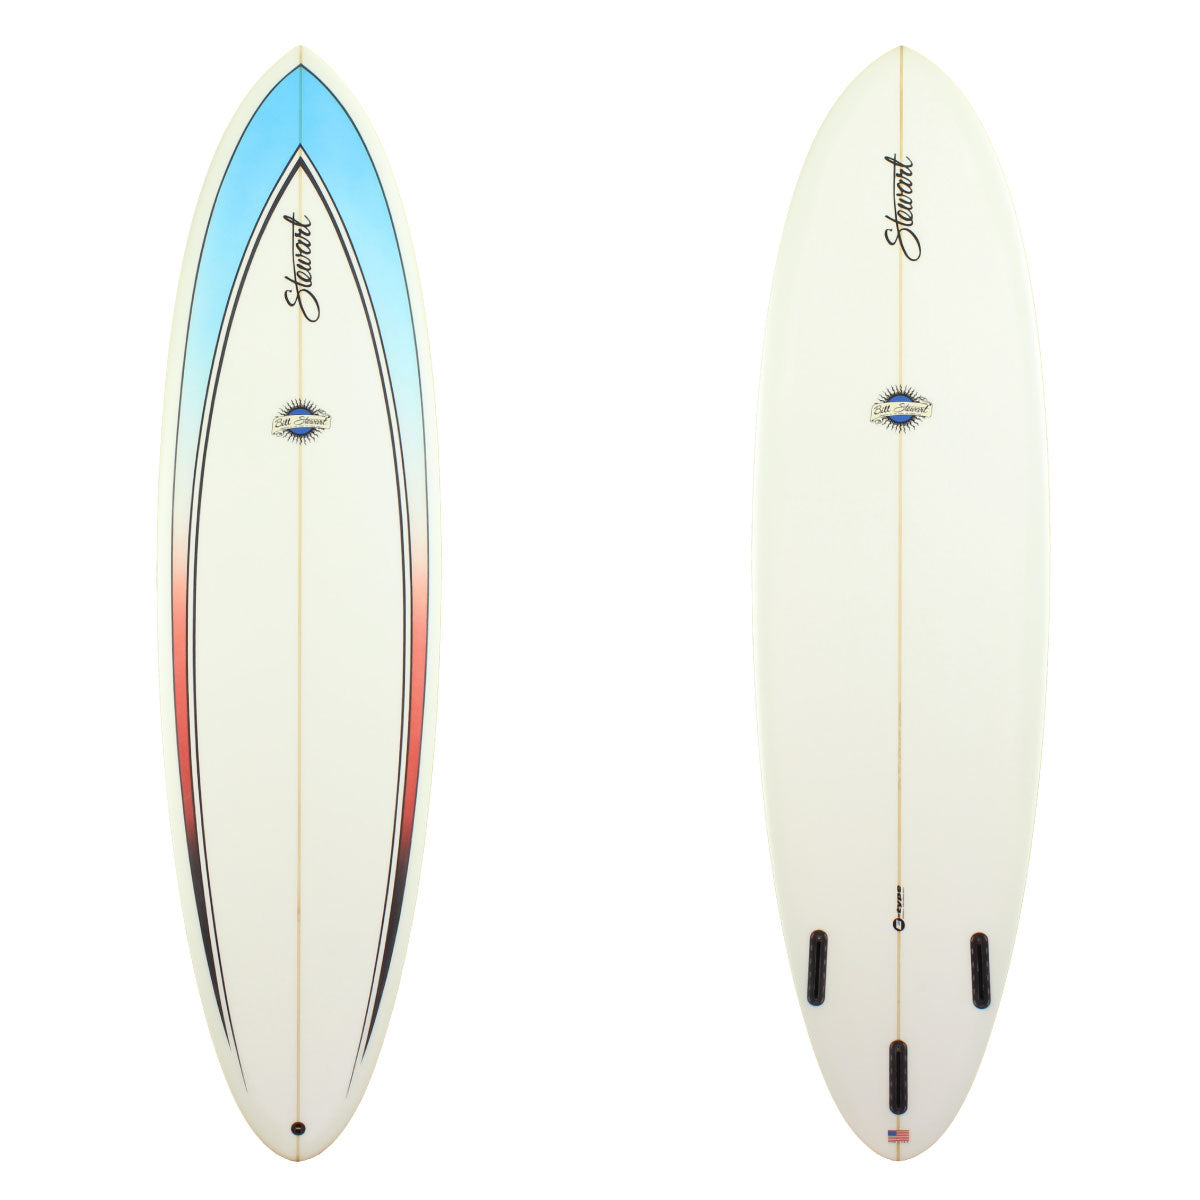 Stewart Surfboards 7'4 Funboard Comp with painted deck panels blue fading to red to black